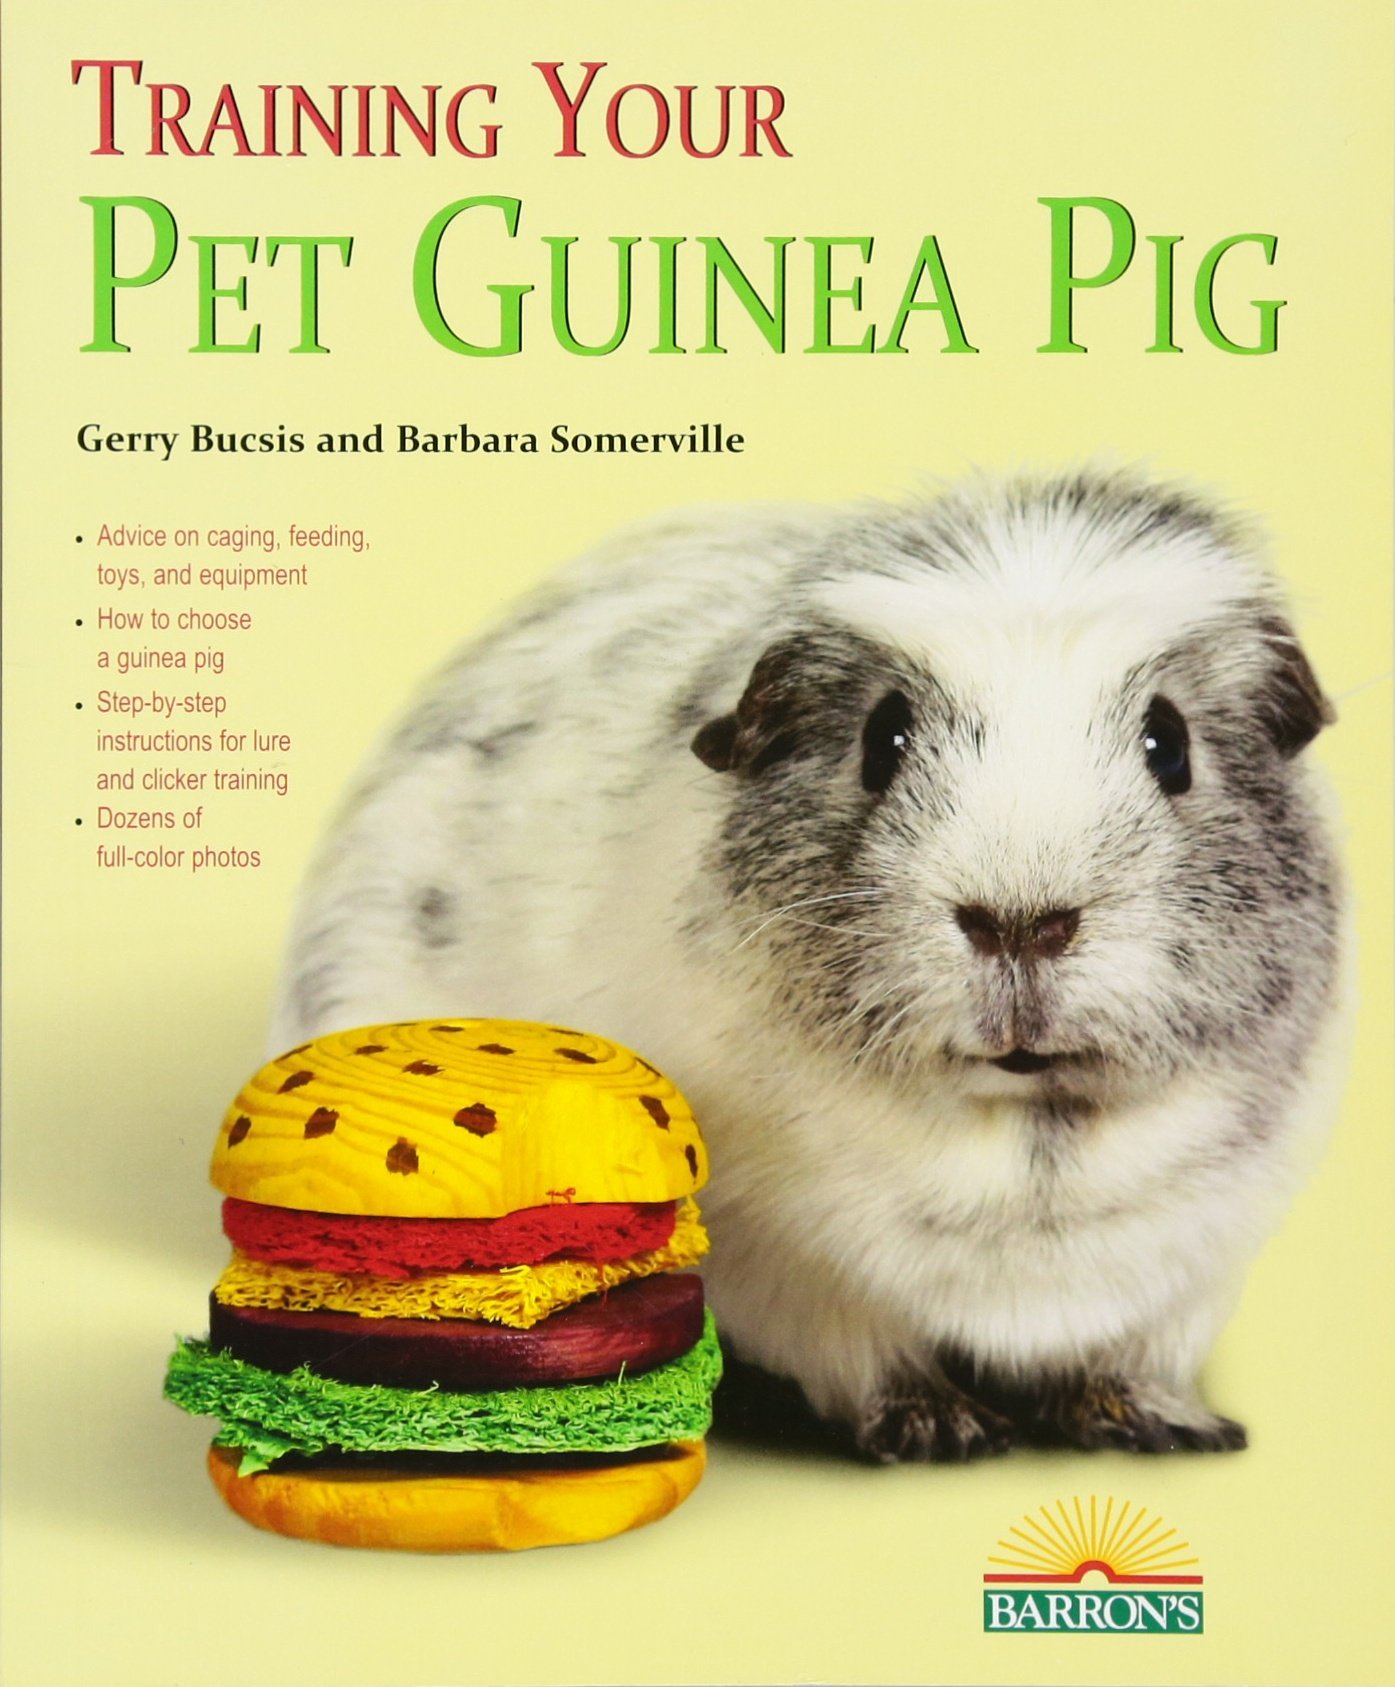 Training Your Guinea Pig (Training Your Pet Series): Gerry Bucsis ...